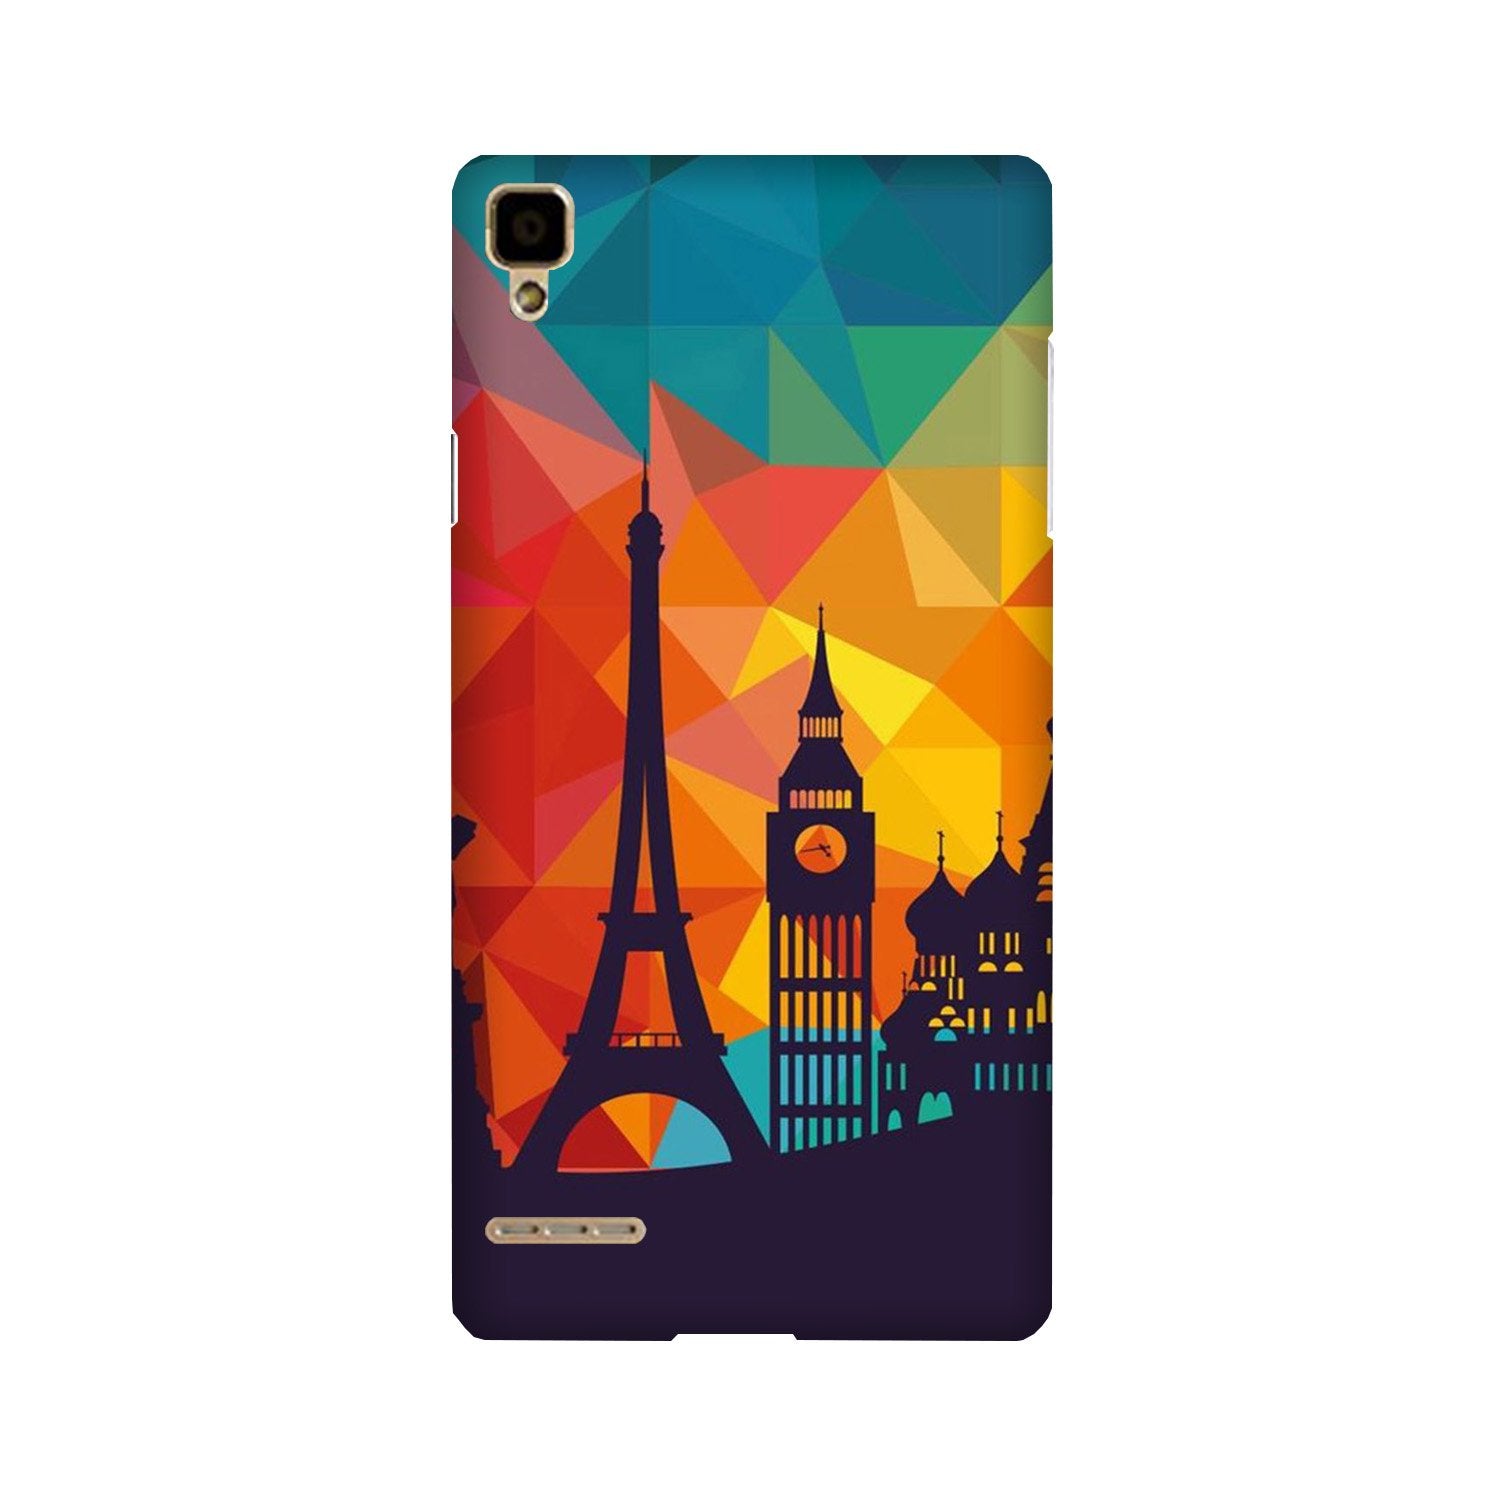 Eiffel Tower2 Case for Oppo F1